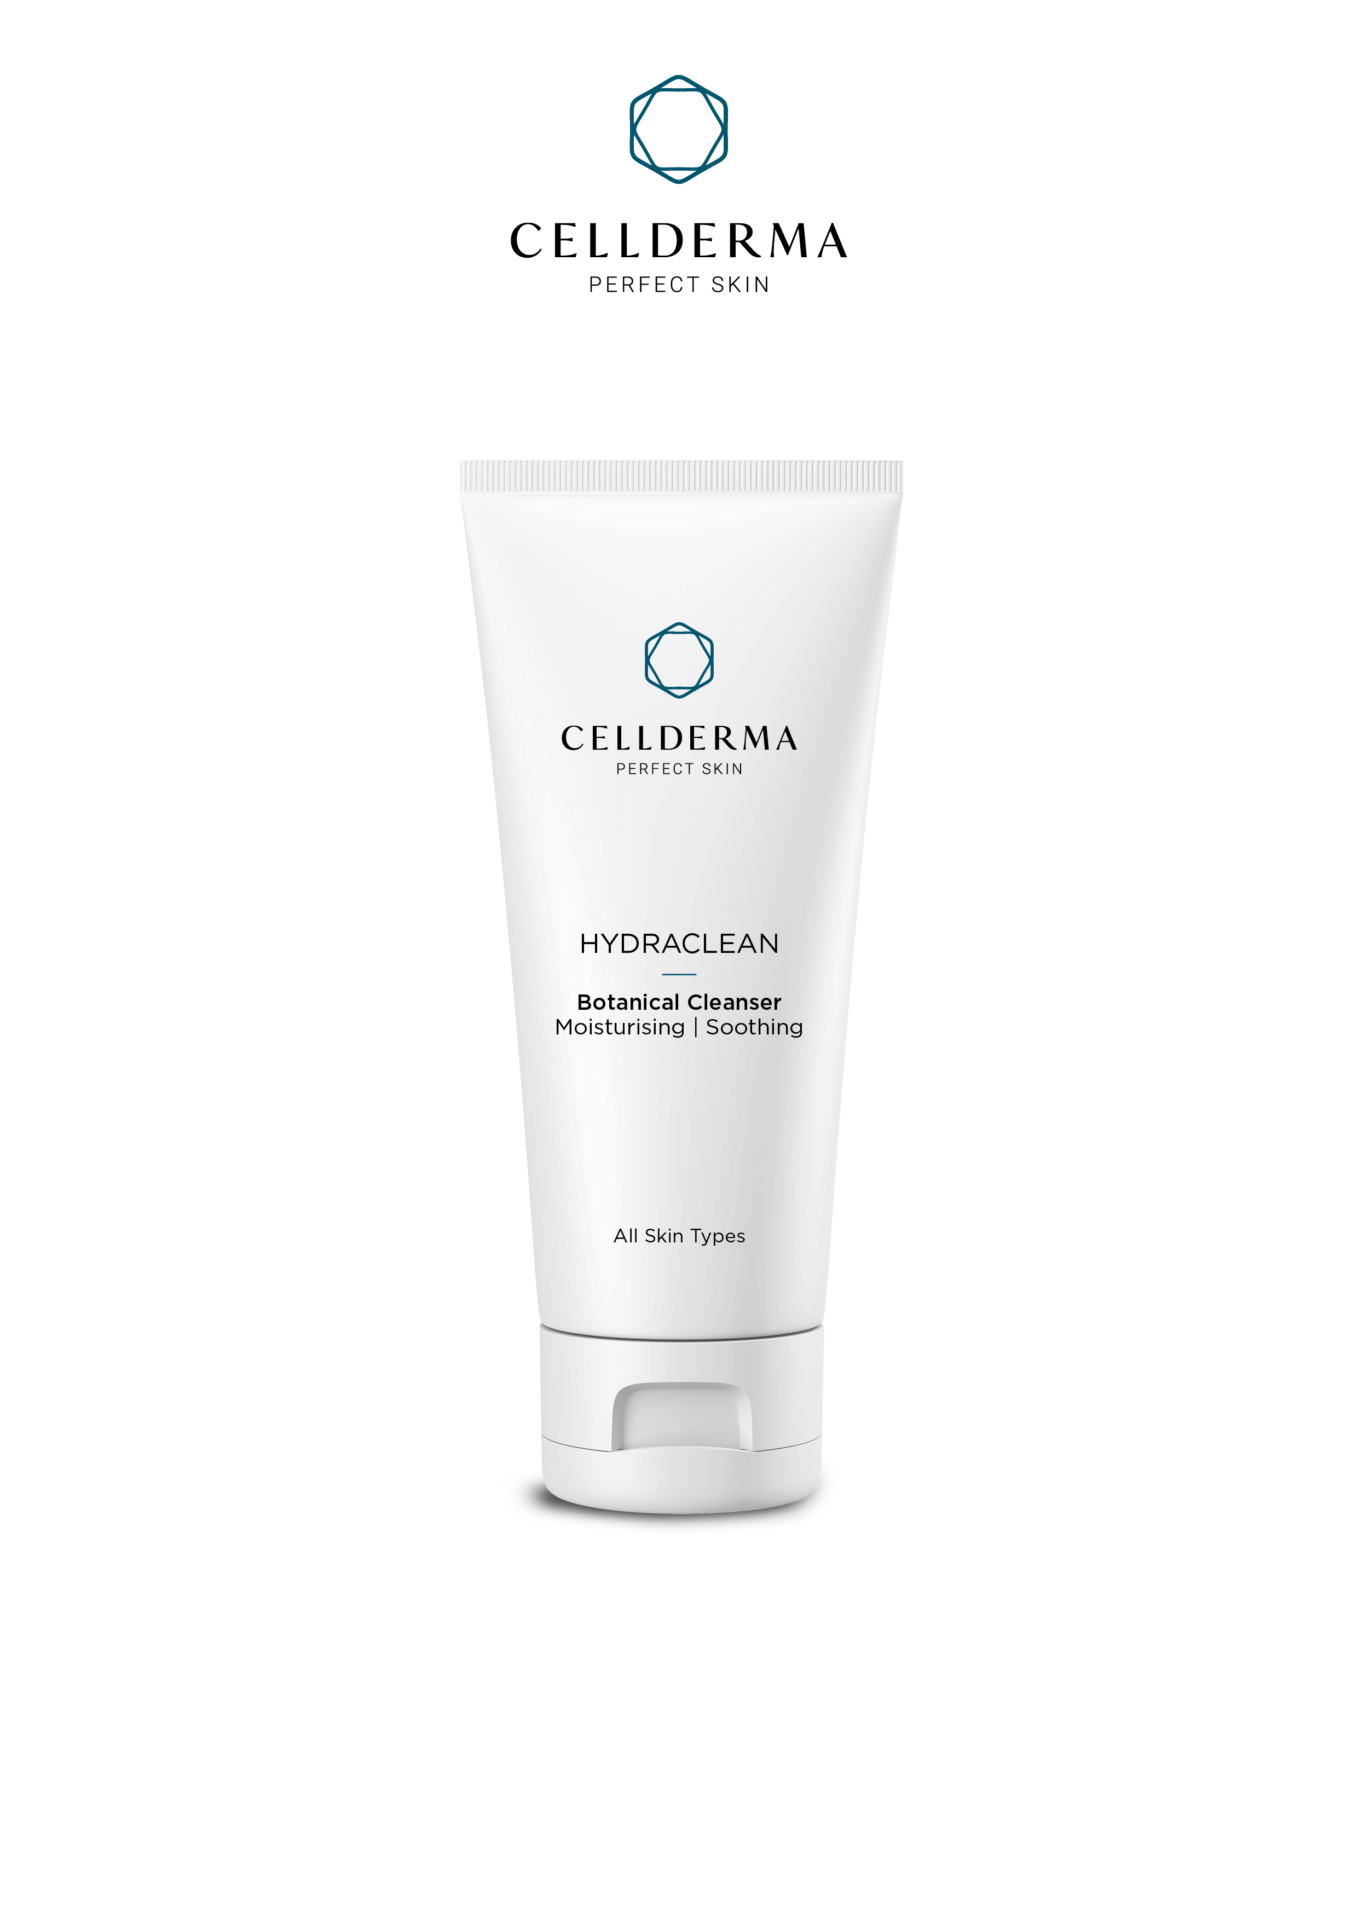 6874-Cellderma-3Ds-Pres-v32-Hydraclean